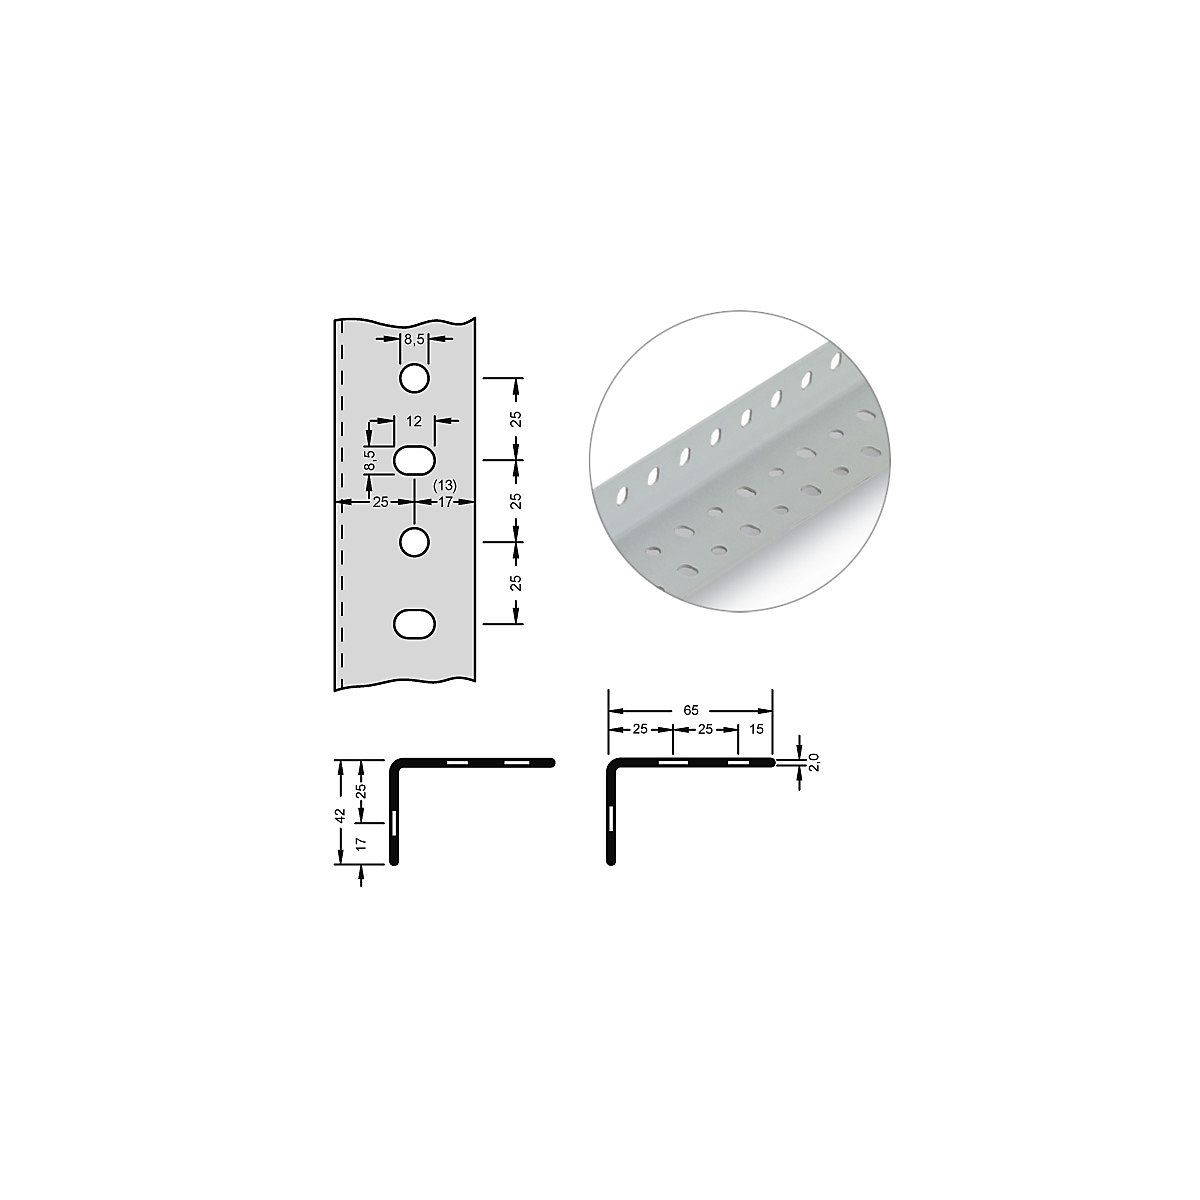 Angled steel profile for modular system – hofe, 65 x 42 x 2 mm, length 2.5 m, light grey, pack of 8-7